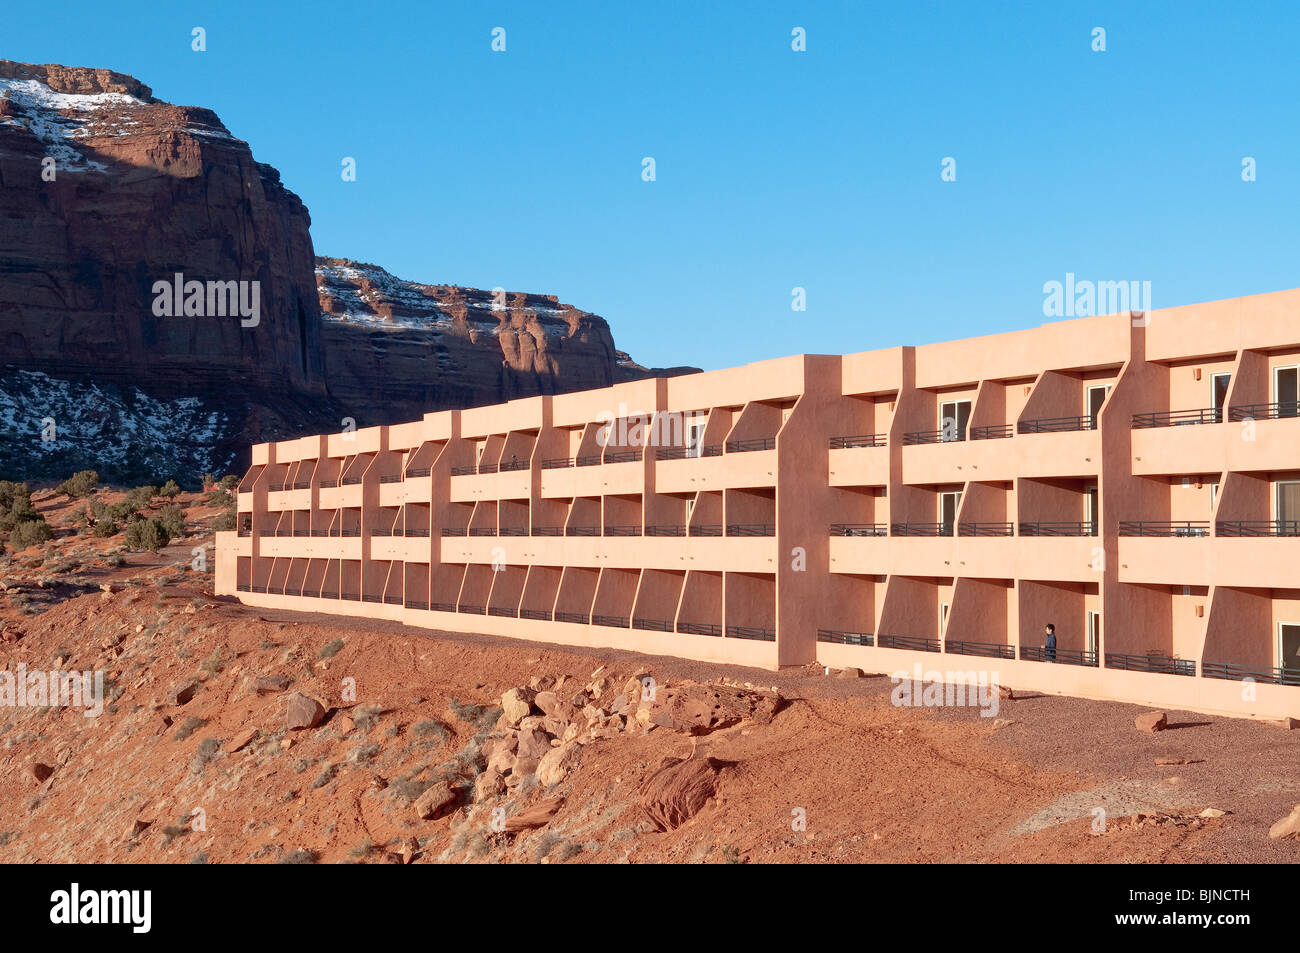 The 'View Hotel' on the Navajo Reservation at Monument Valley, Arizona. Stock Photo